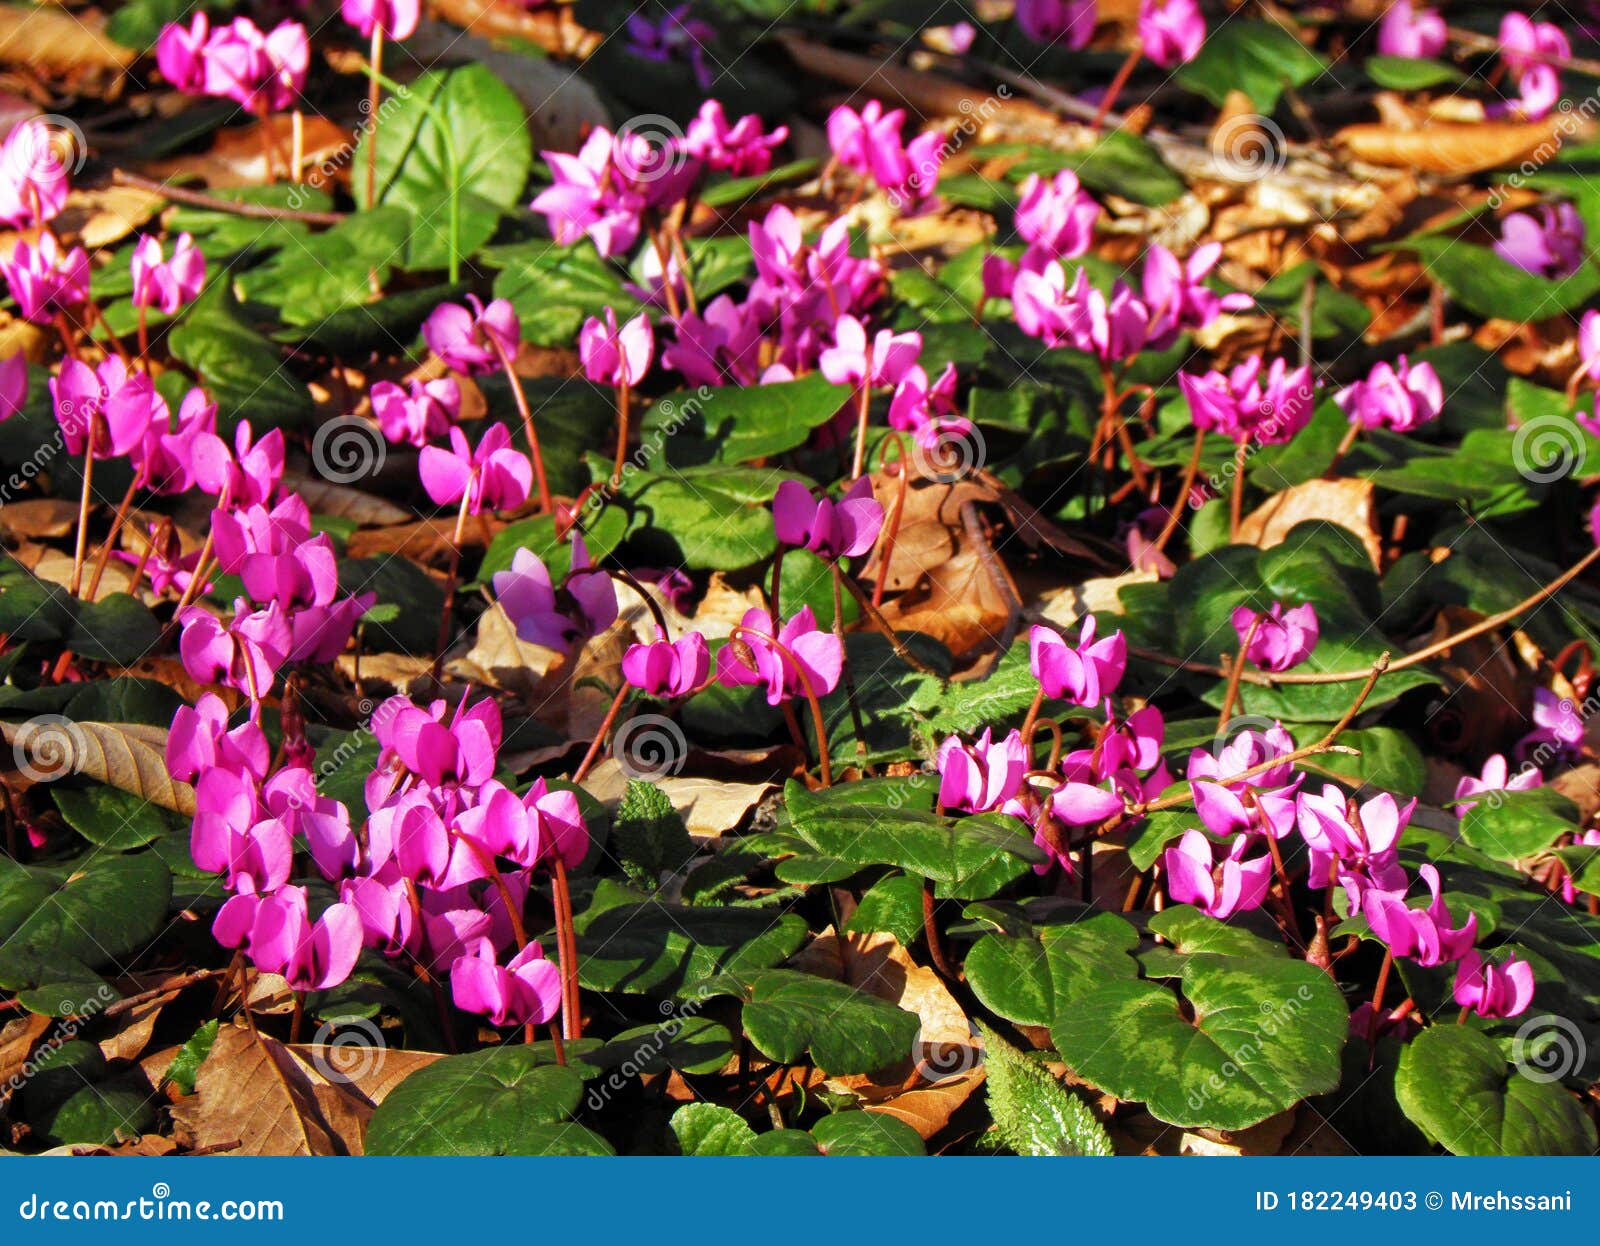 Cyclamen Coum Flowers Natural on Forest Floor Stock Image - Image of  forest, genus: 182249403